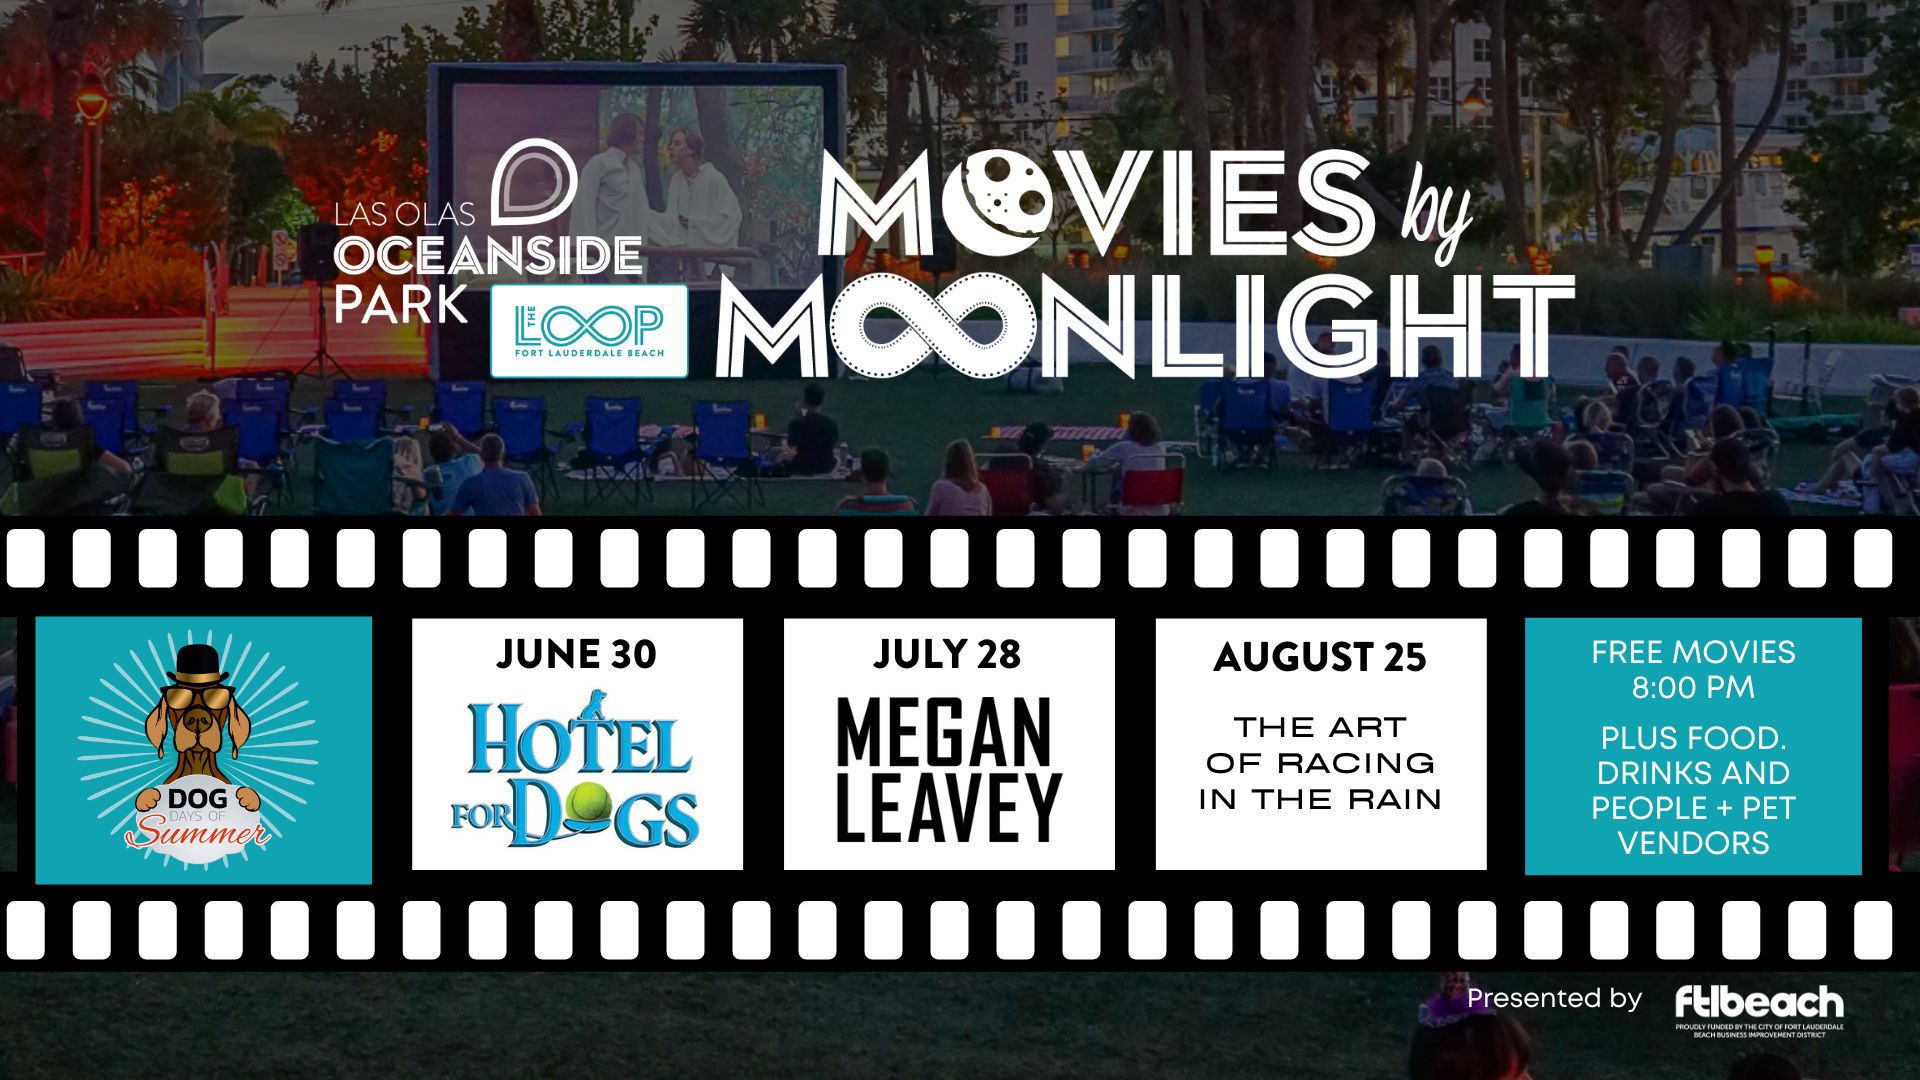 Movies by Moonlight